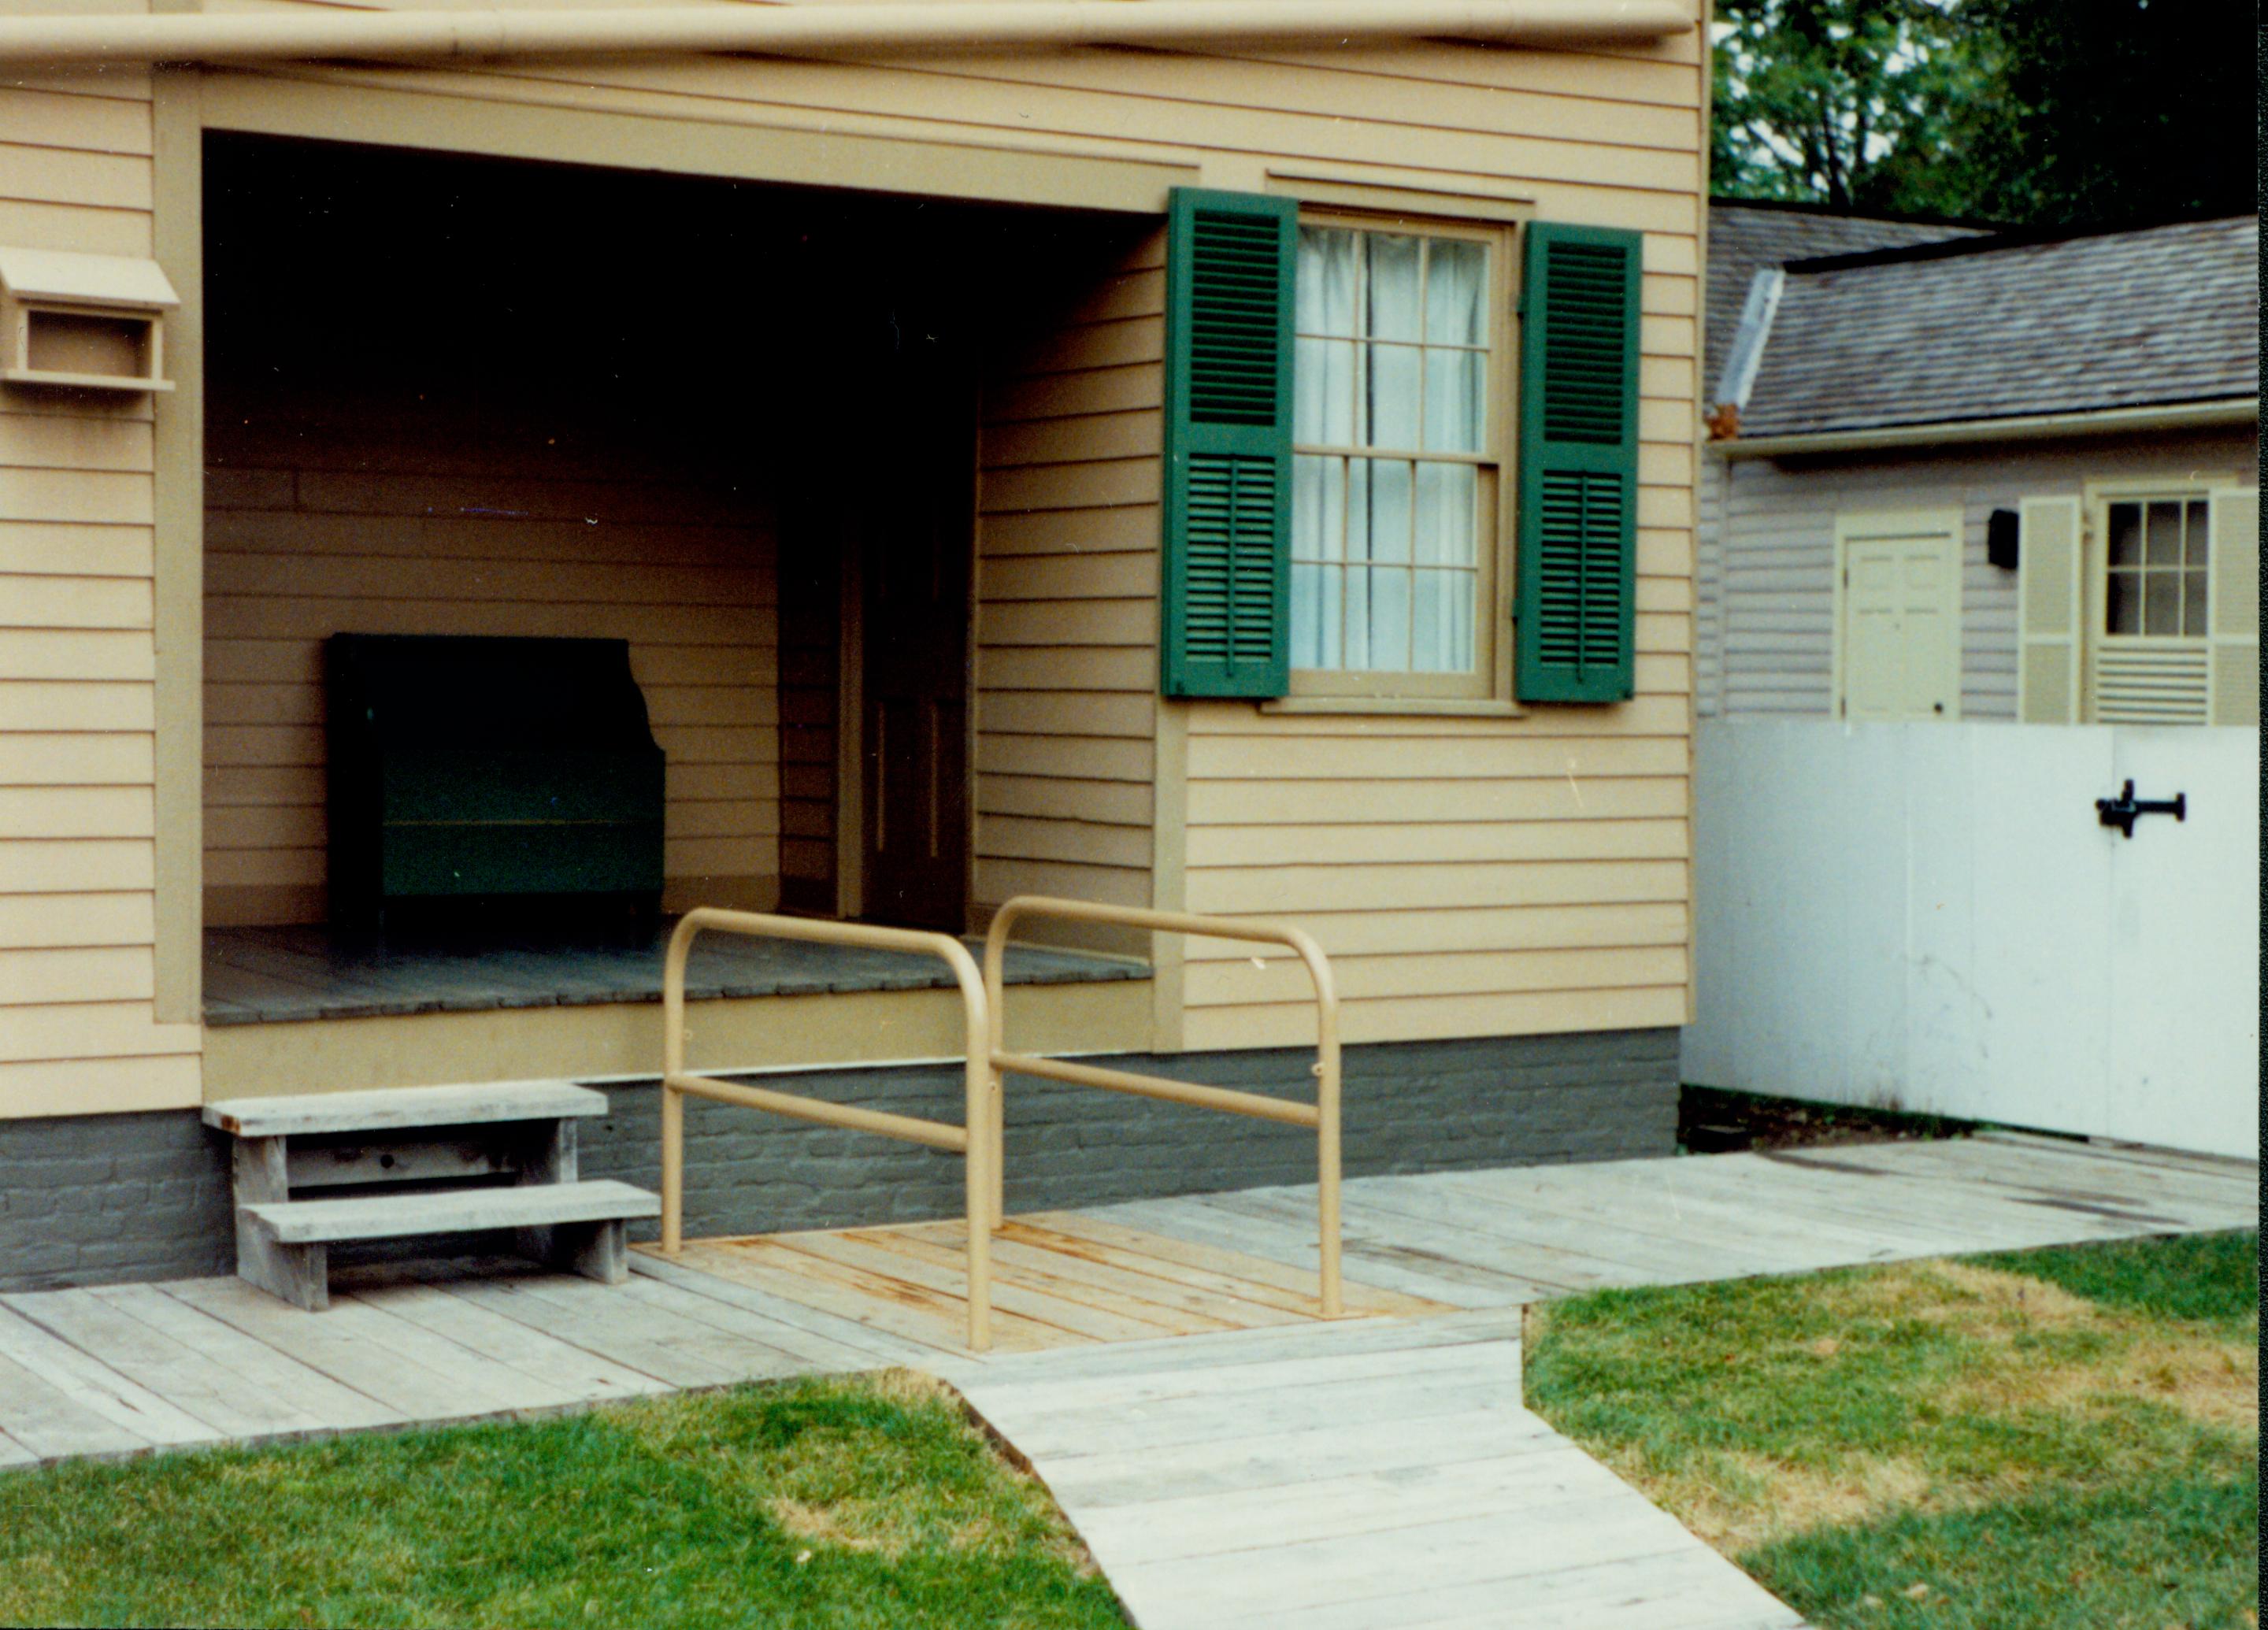 The wheelchair lift of the Lincoln Home fully retracted with handrails. Corneau house in background. Photographer facing north west.